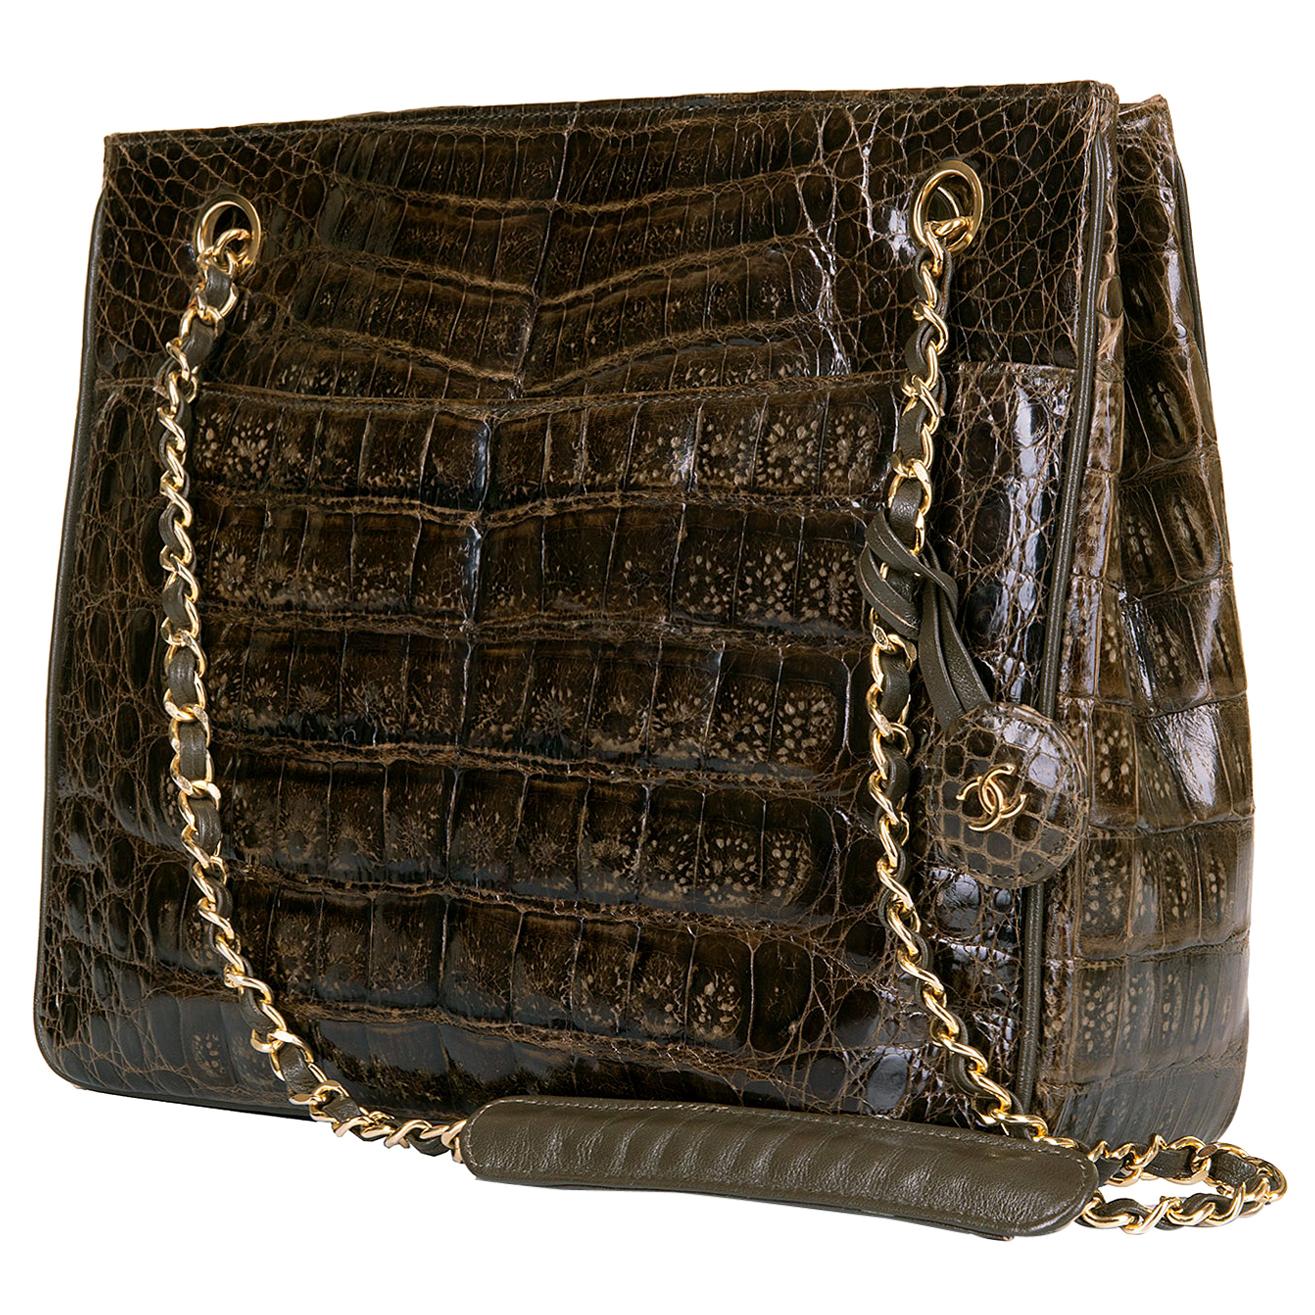 A Very Rare Chanel Chocolate Brown Alligator Shoulder Bag by Karl Lagerfeld For Sale